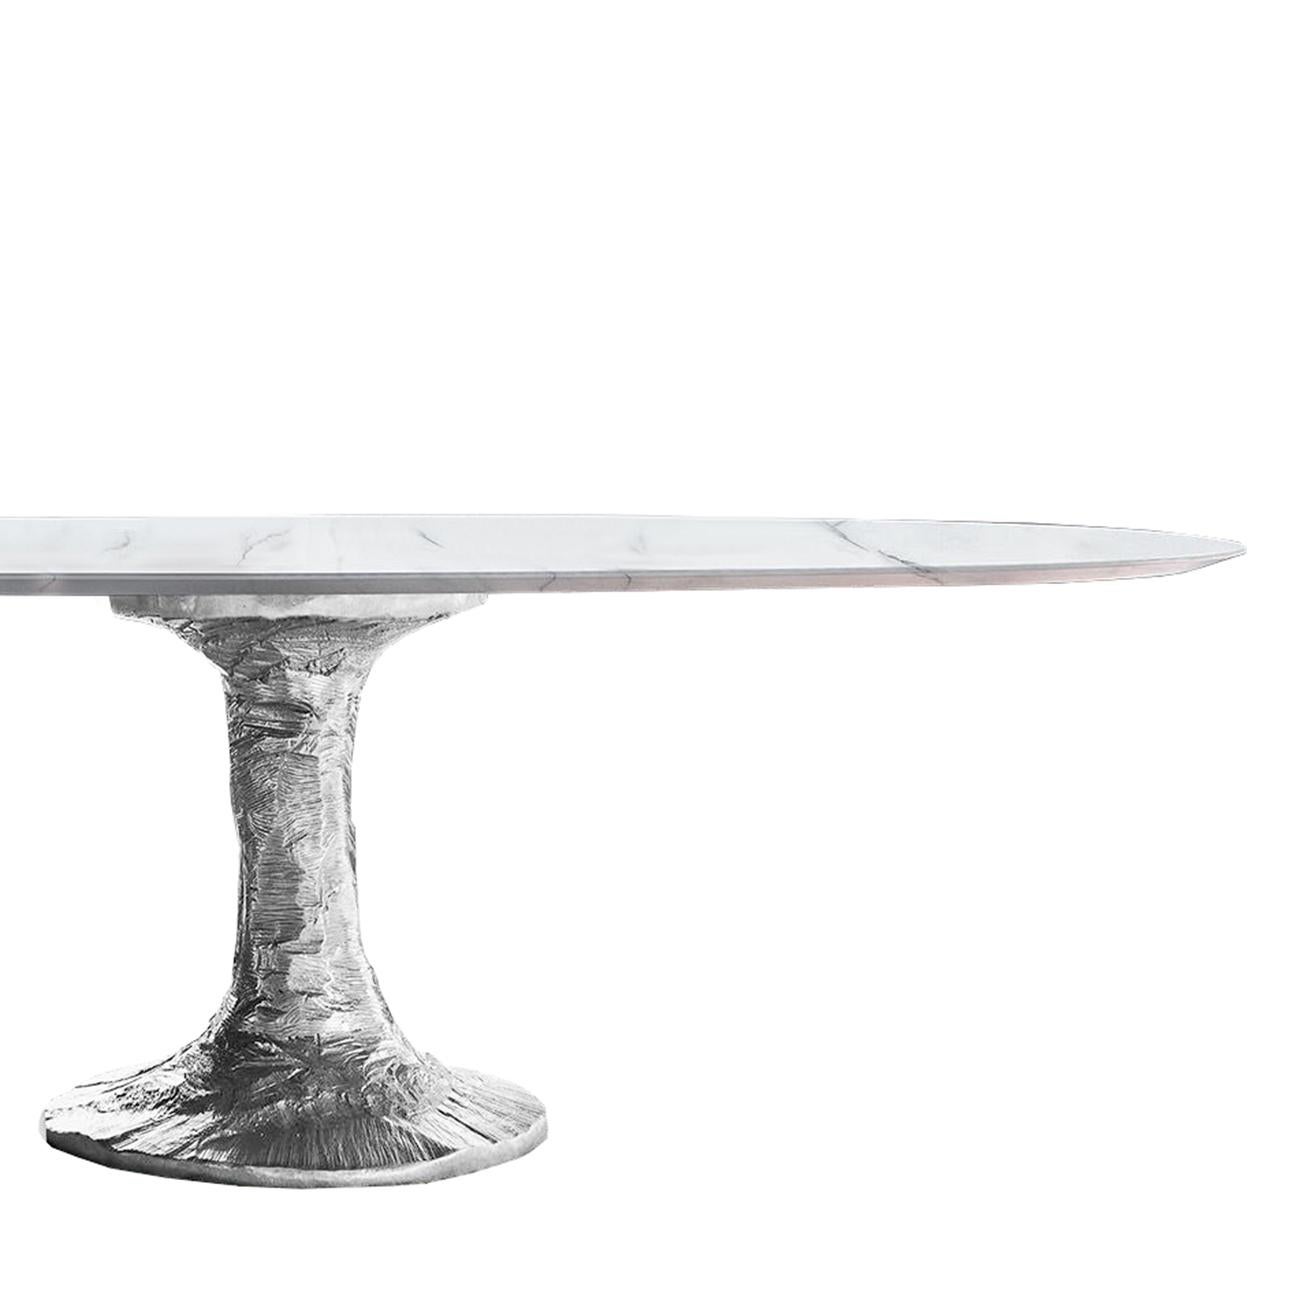 Table Perenza oval with white carrara marble top,
reinforced with metal frame below. On casted aluminium
base. Base diameter: 68cm.
Also available in L 200 x D 105 x H7 5cm, price: 12900,00€.